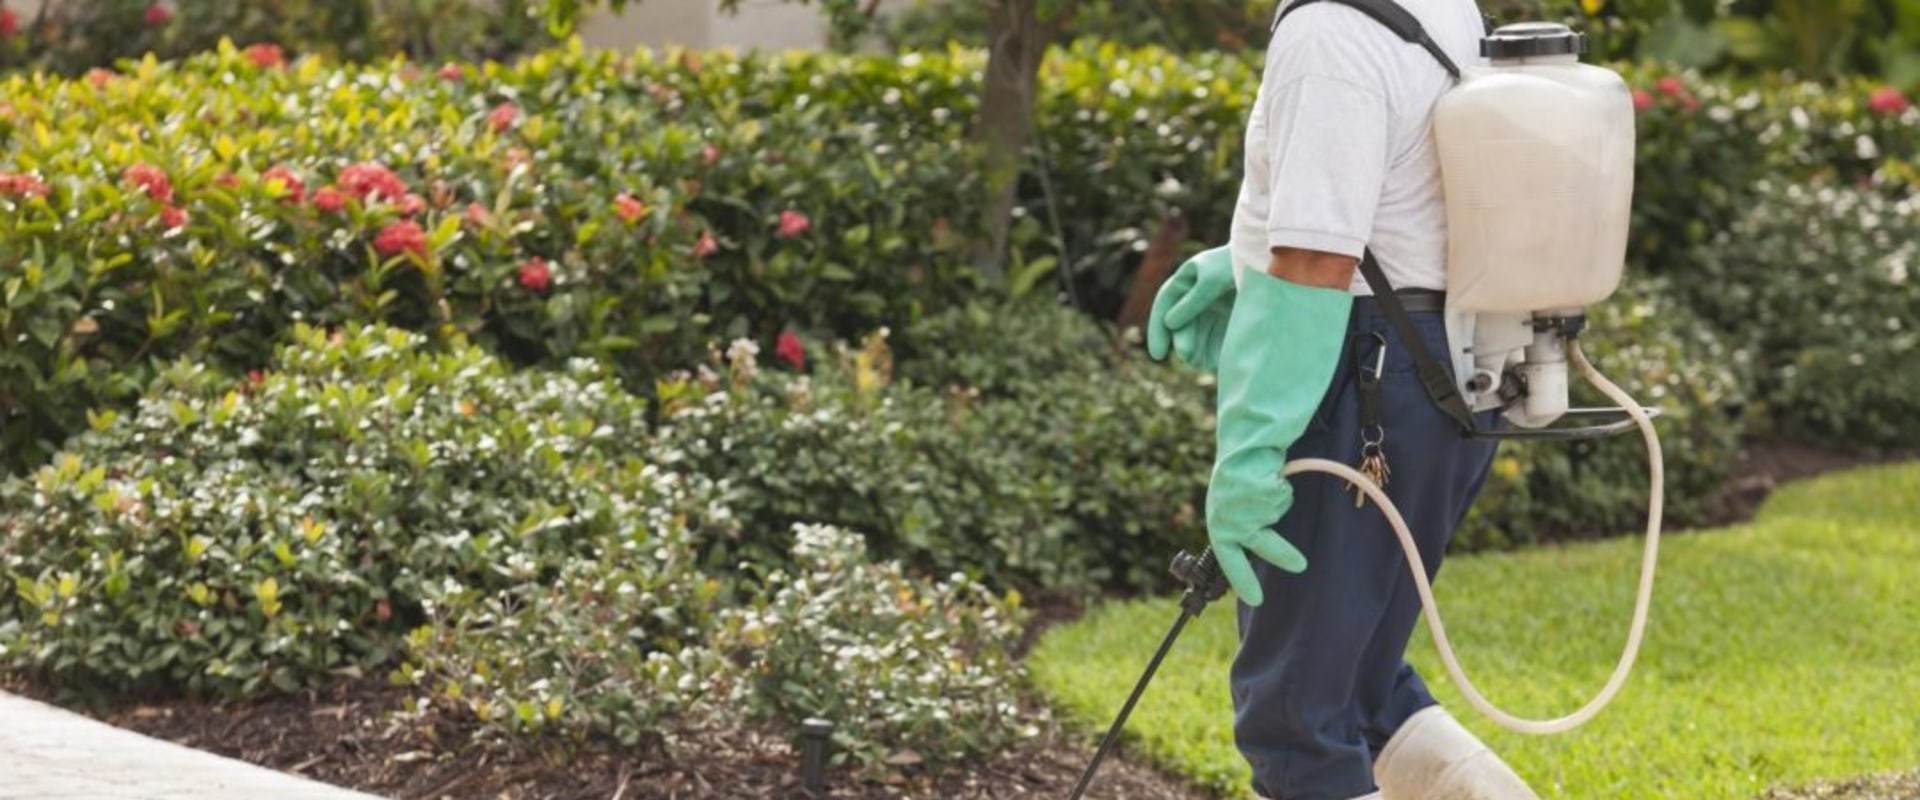 What does a pest control tech make?